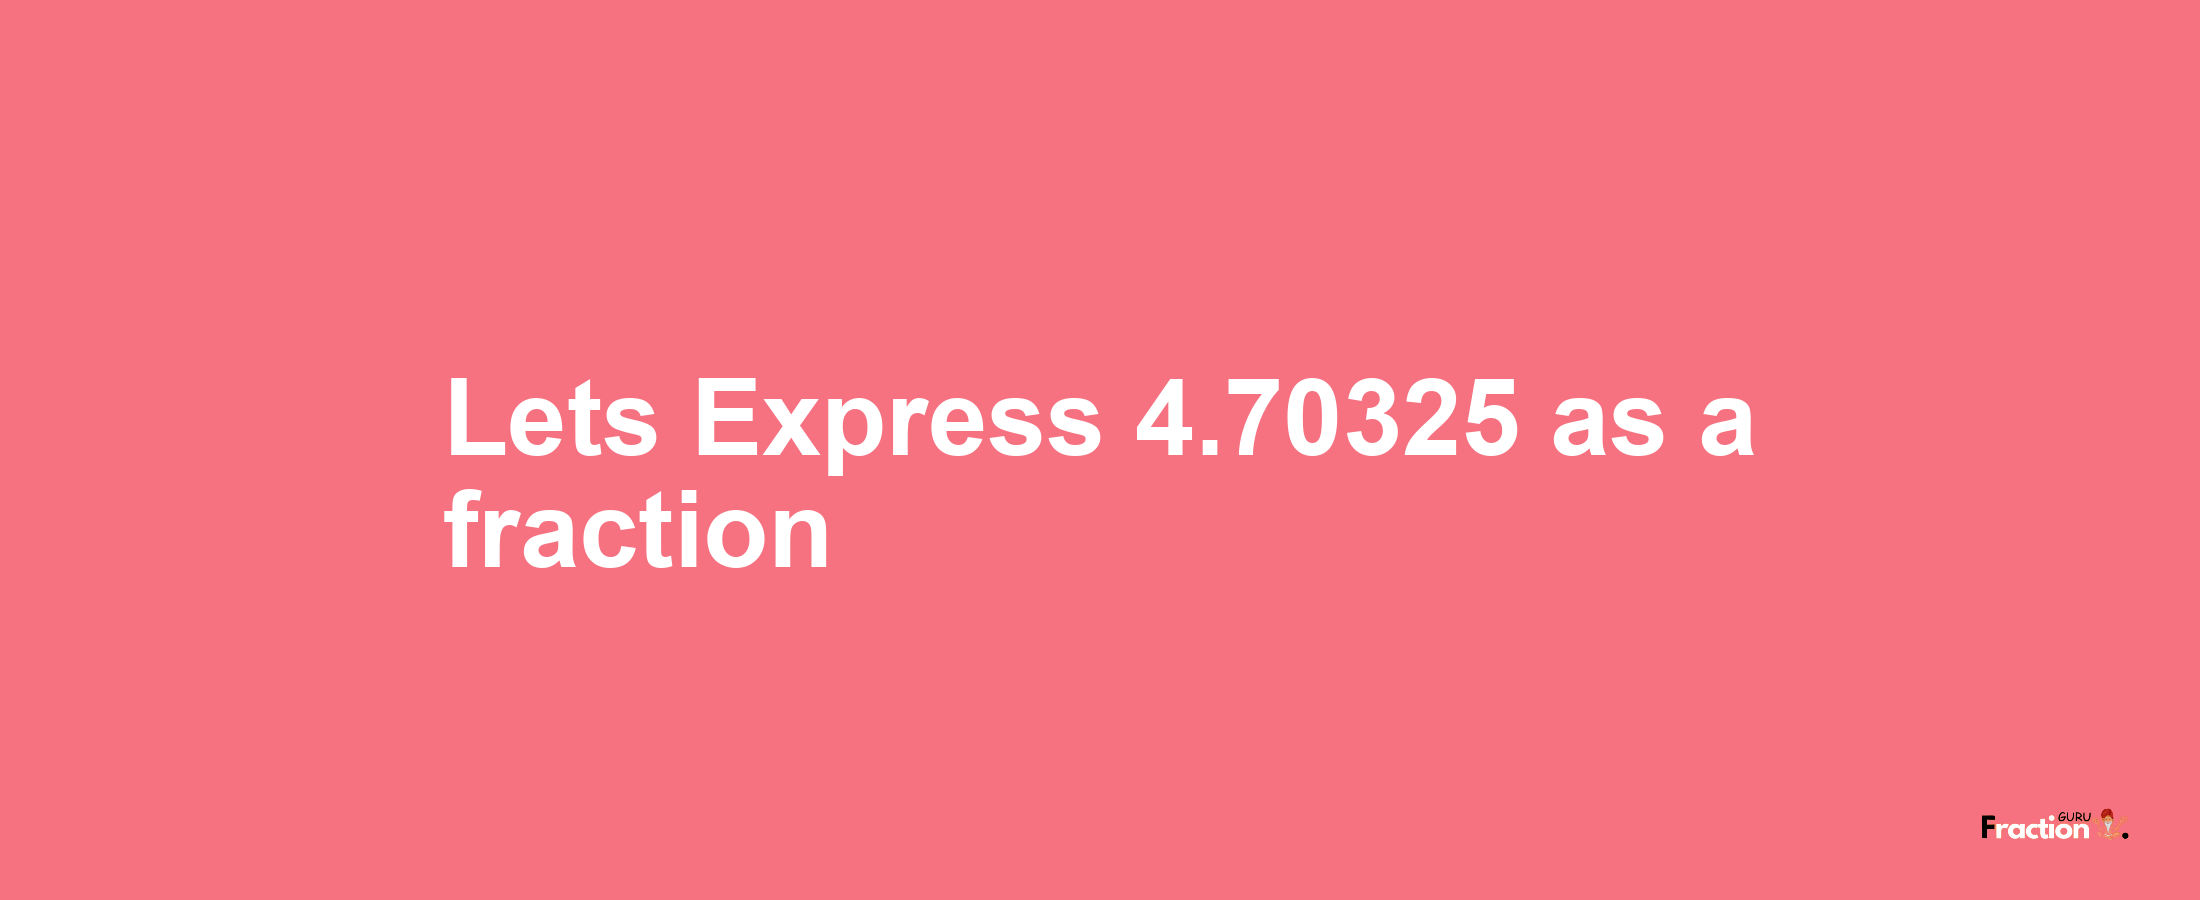 Lets Express 4.70325 as afraction